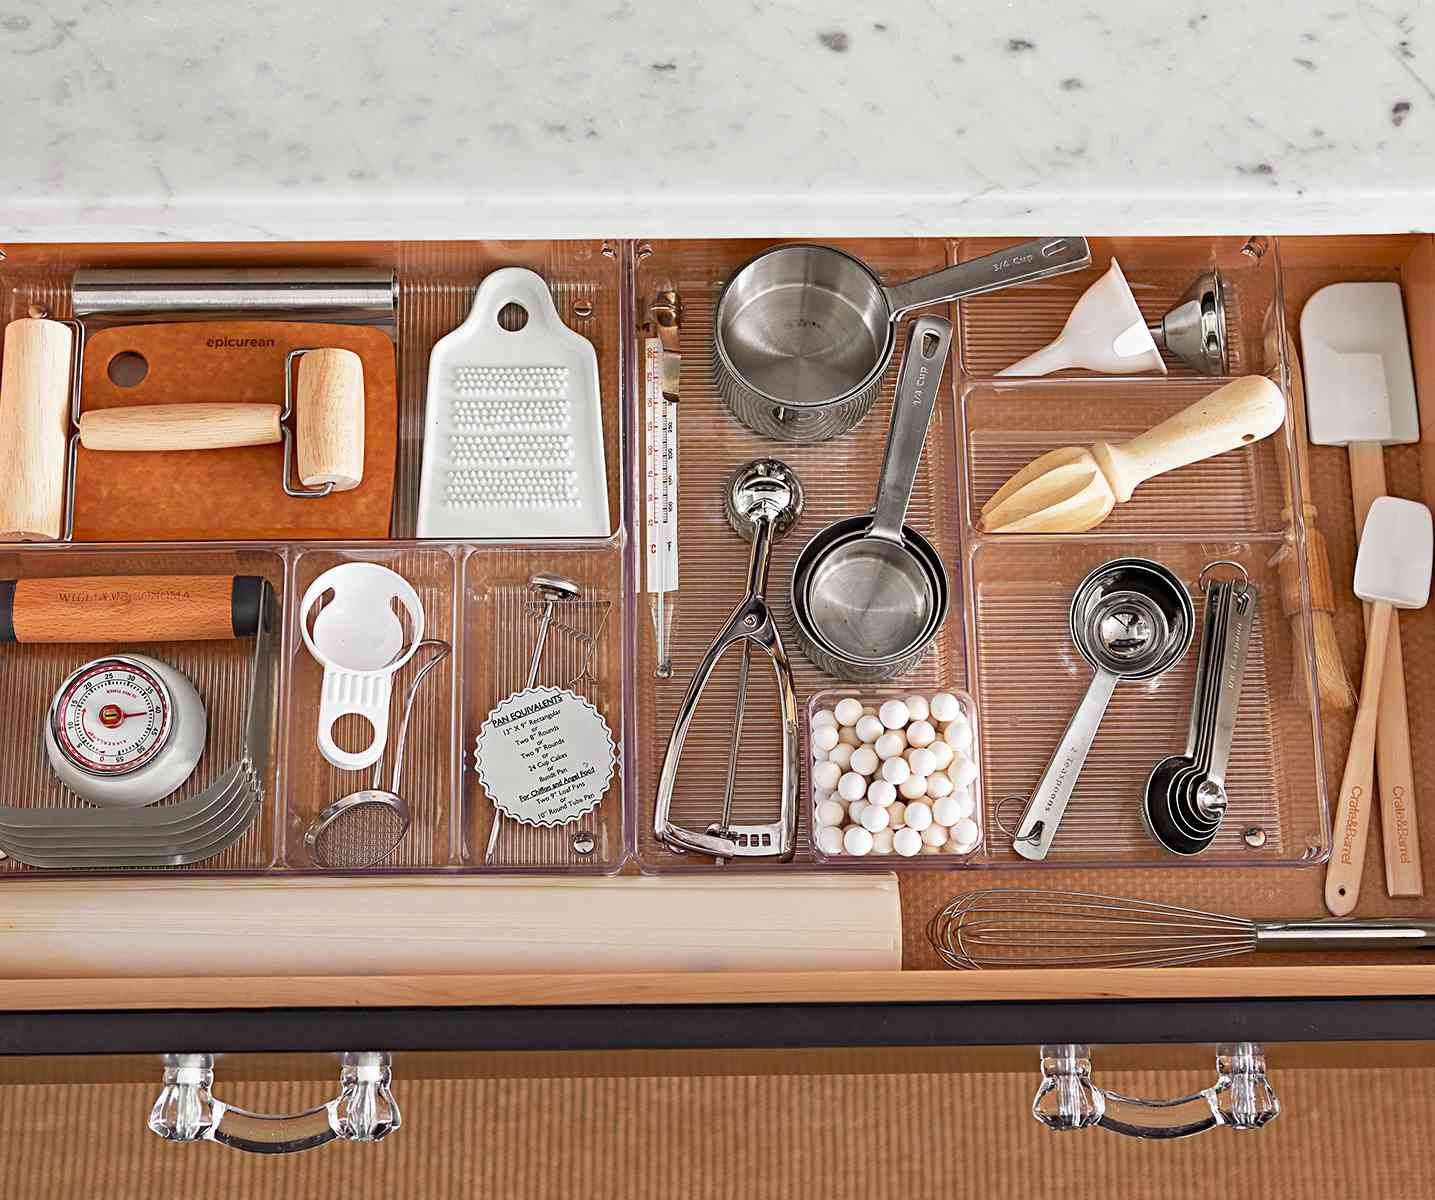 21 Baking Essentials Every Home Cook Needs (Plus 16 Nice-to-Haves)